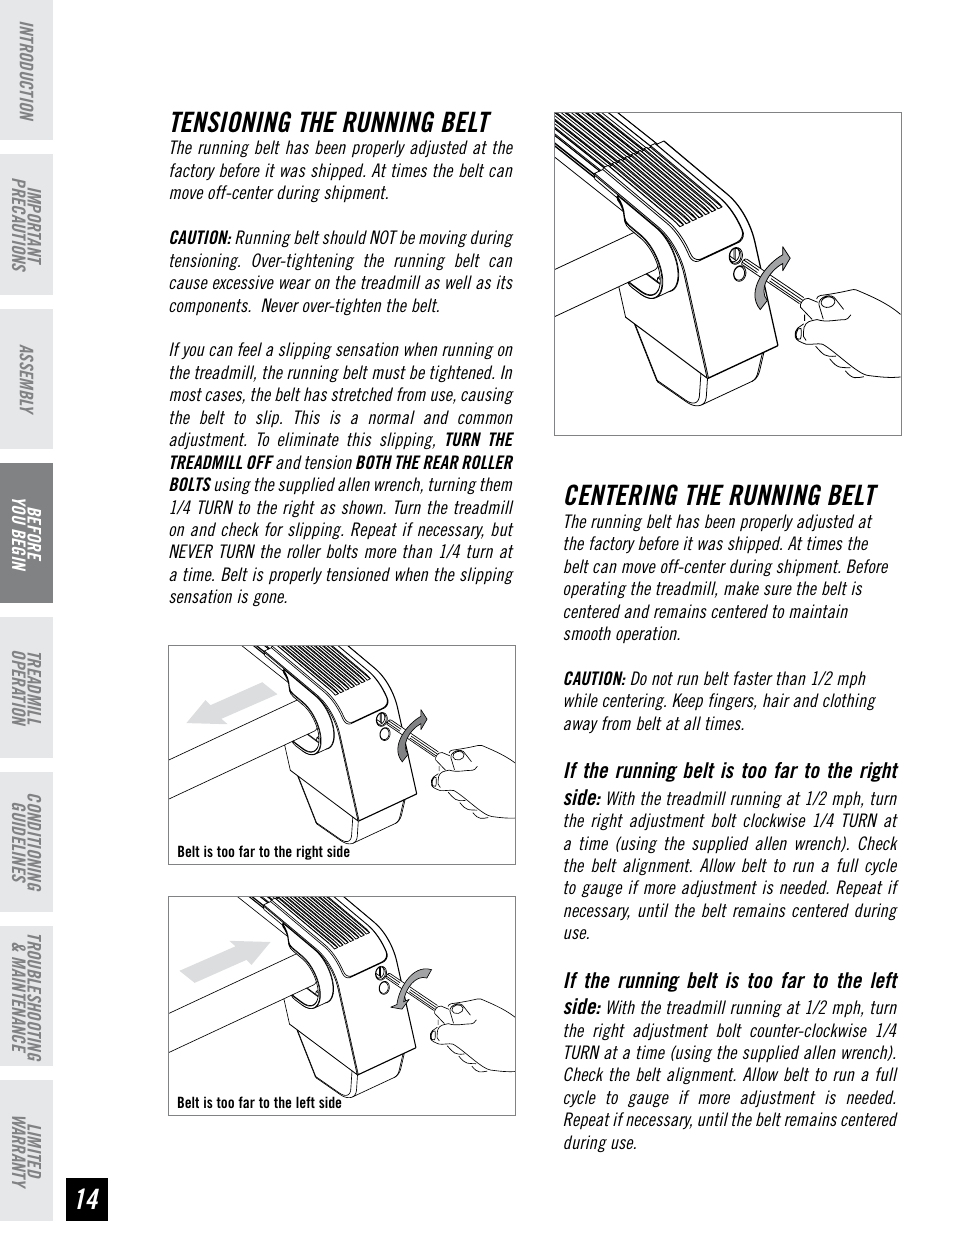 Centering the running belt, Tensioning the running belt | Horizon Fitness RST5.6 User Manual | Page 14 / 32